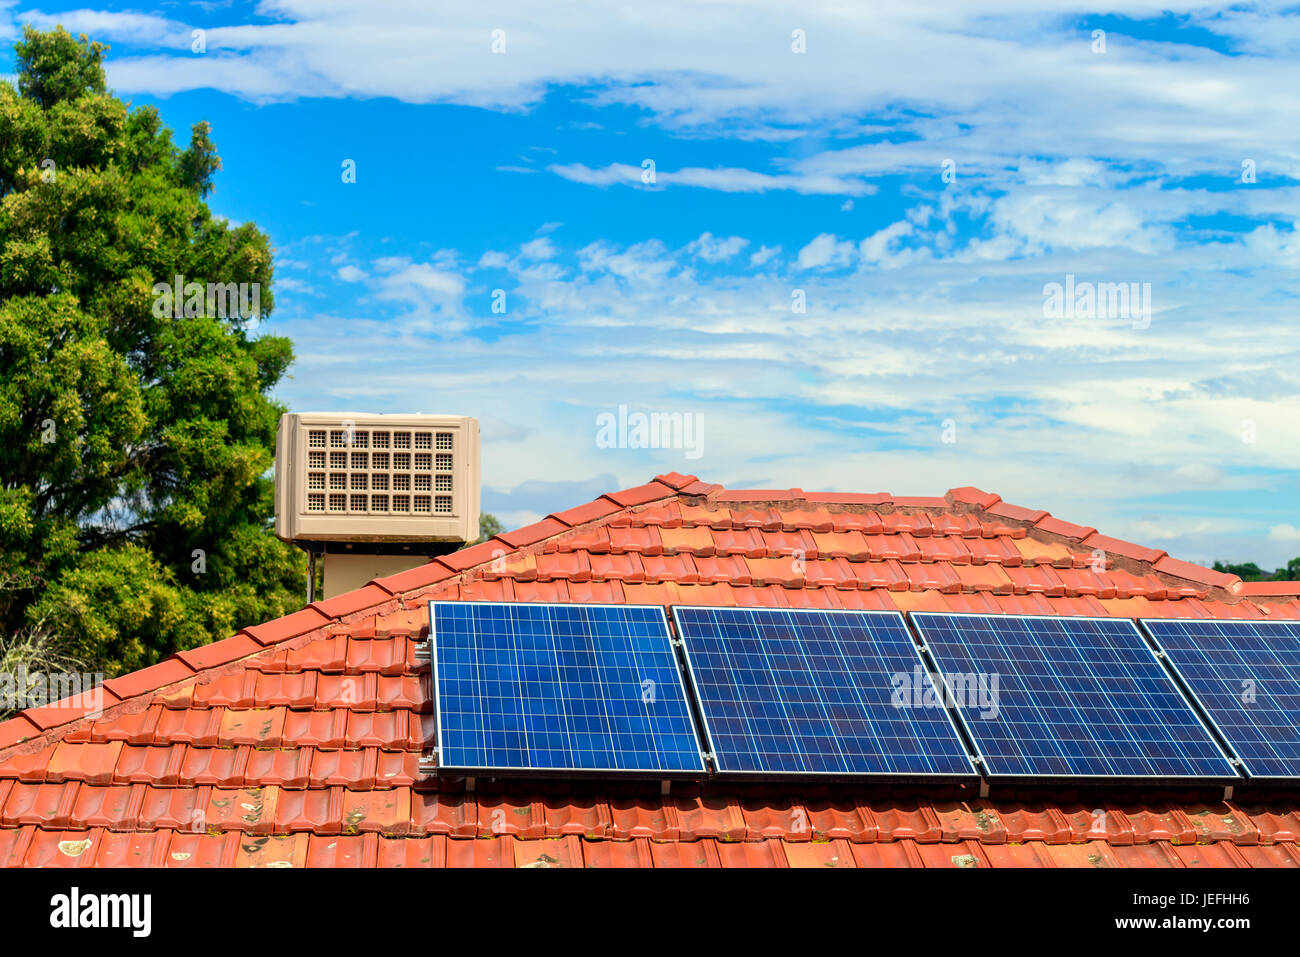 Solar panels installed on the house roof in one of the Melbourne suburbs, Victoria, Australia Stock Photo